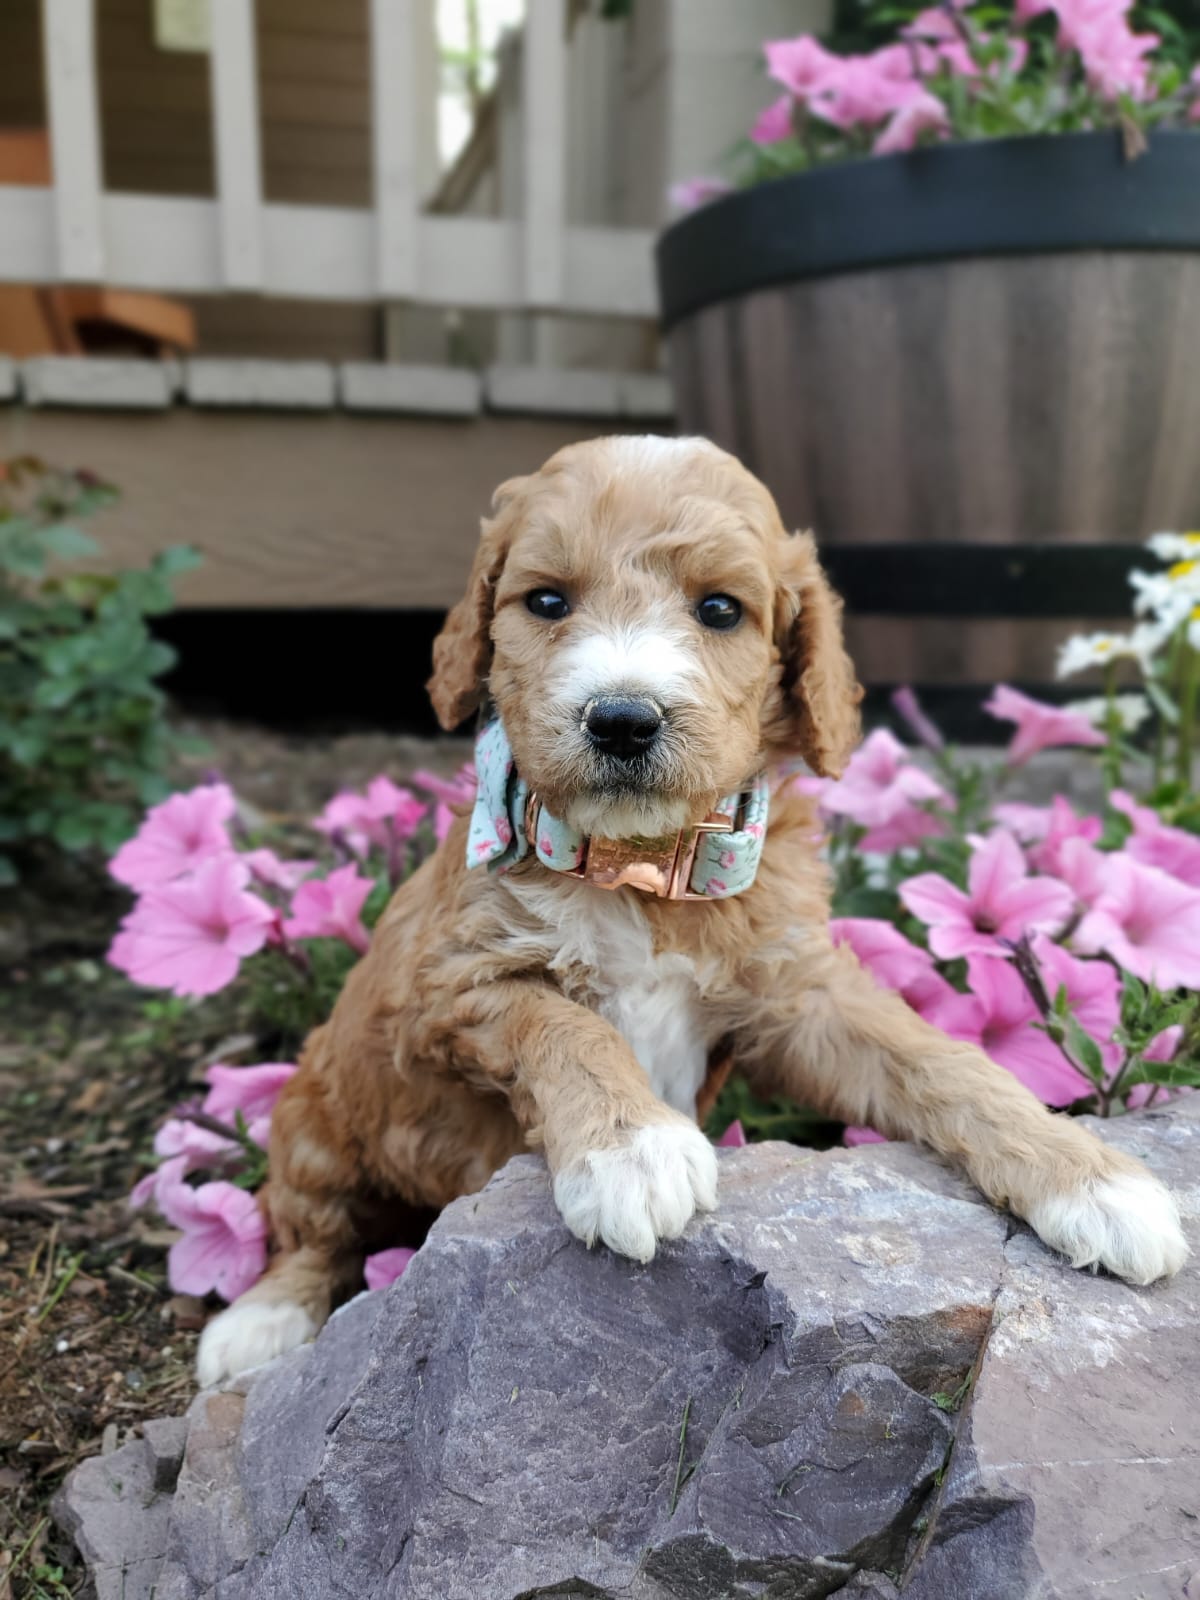 We Have Goldendoodle Puppies For Sale Near Sandpoint ID.